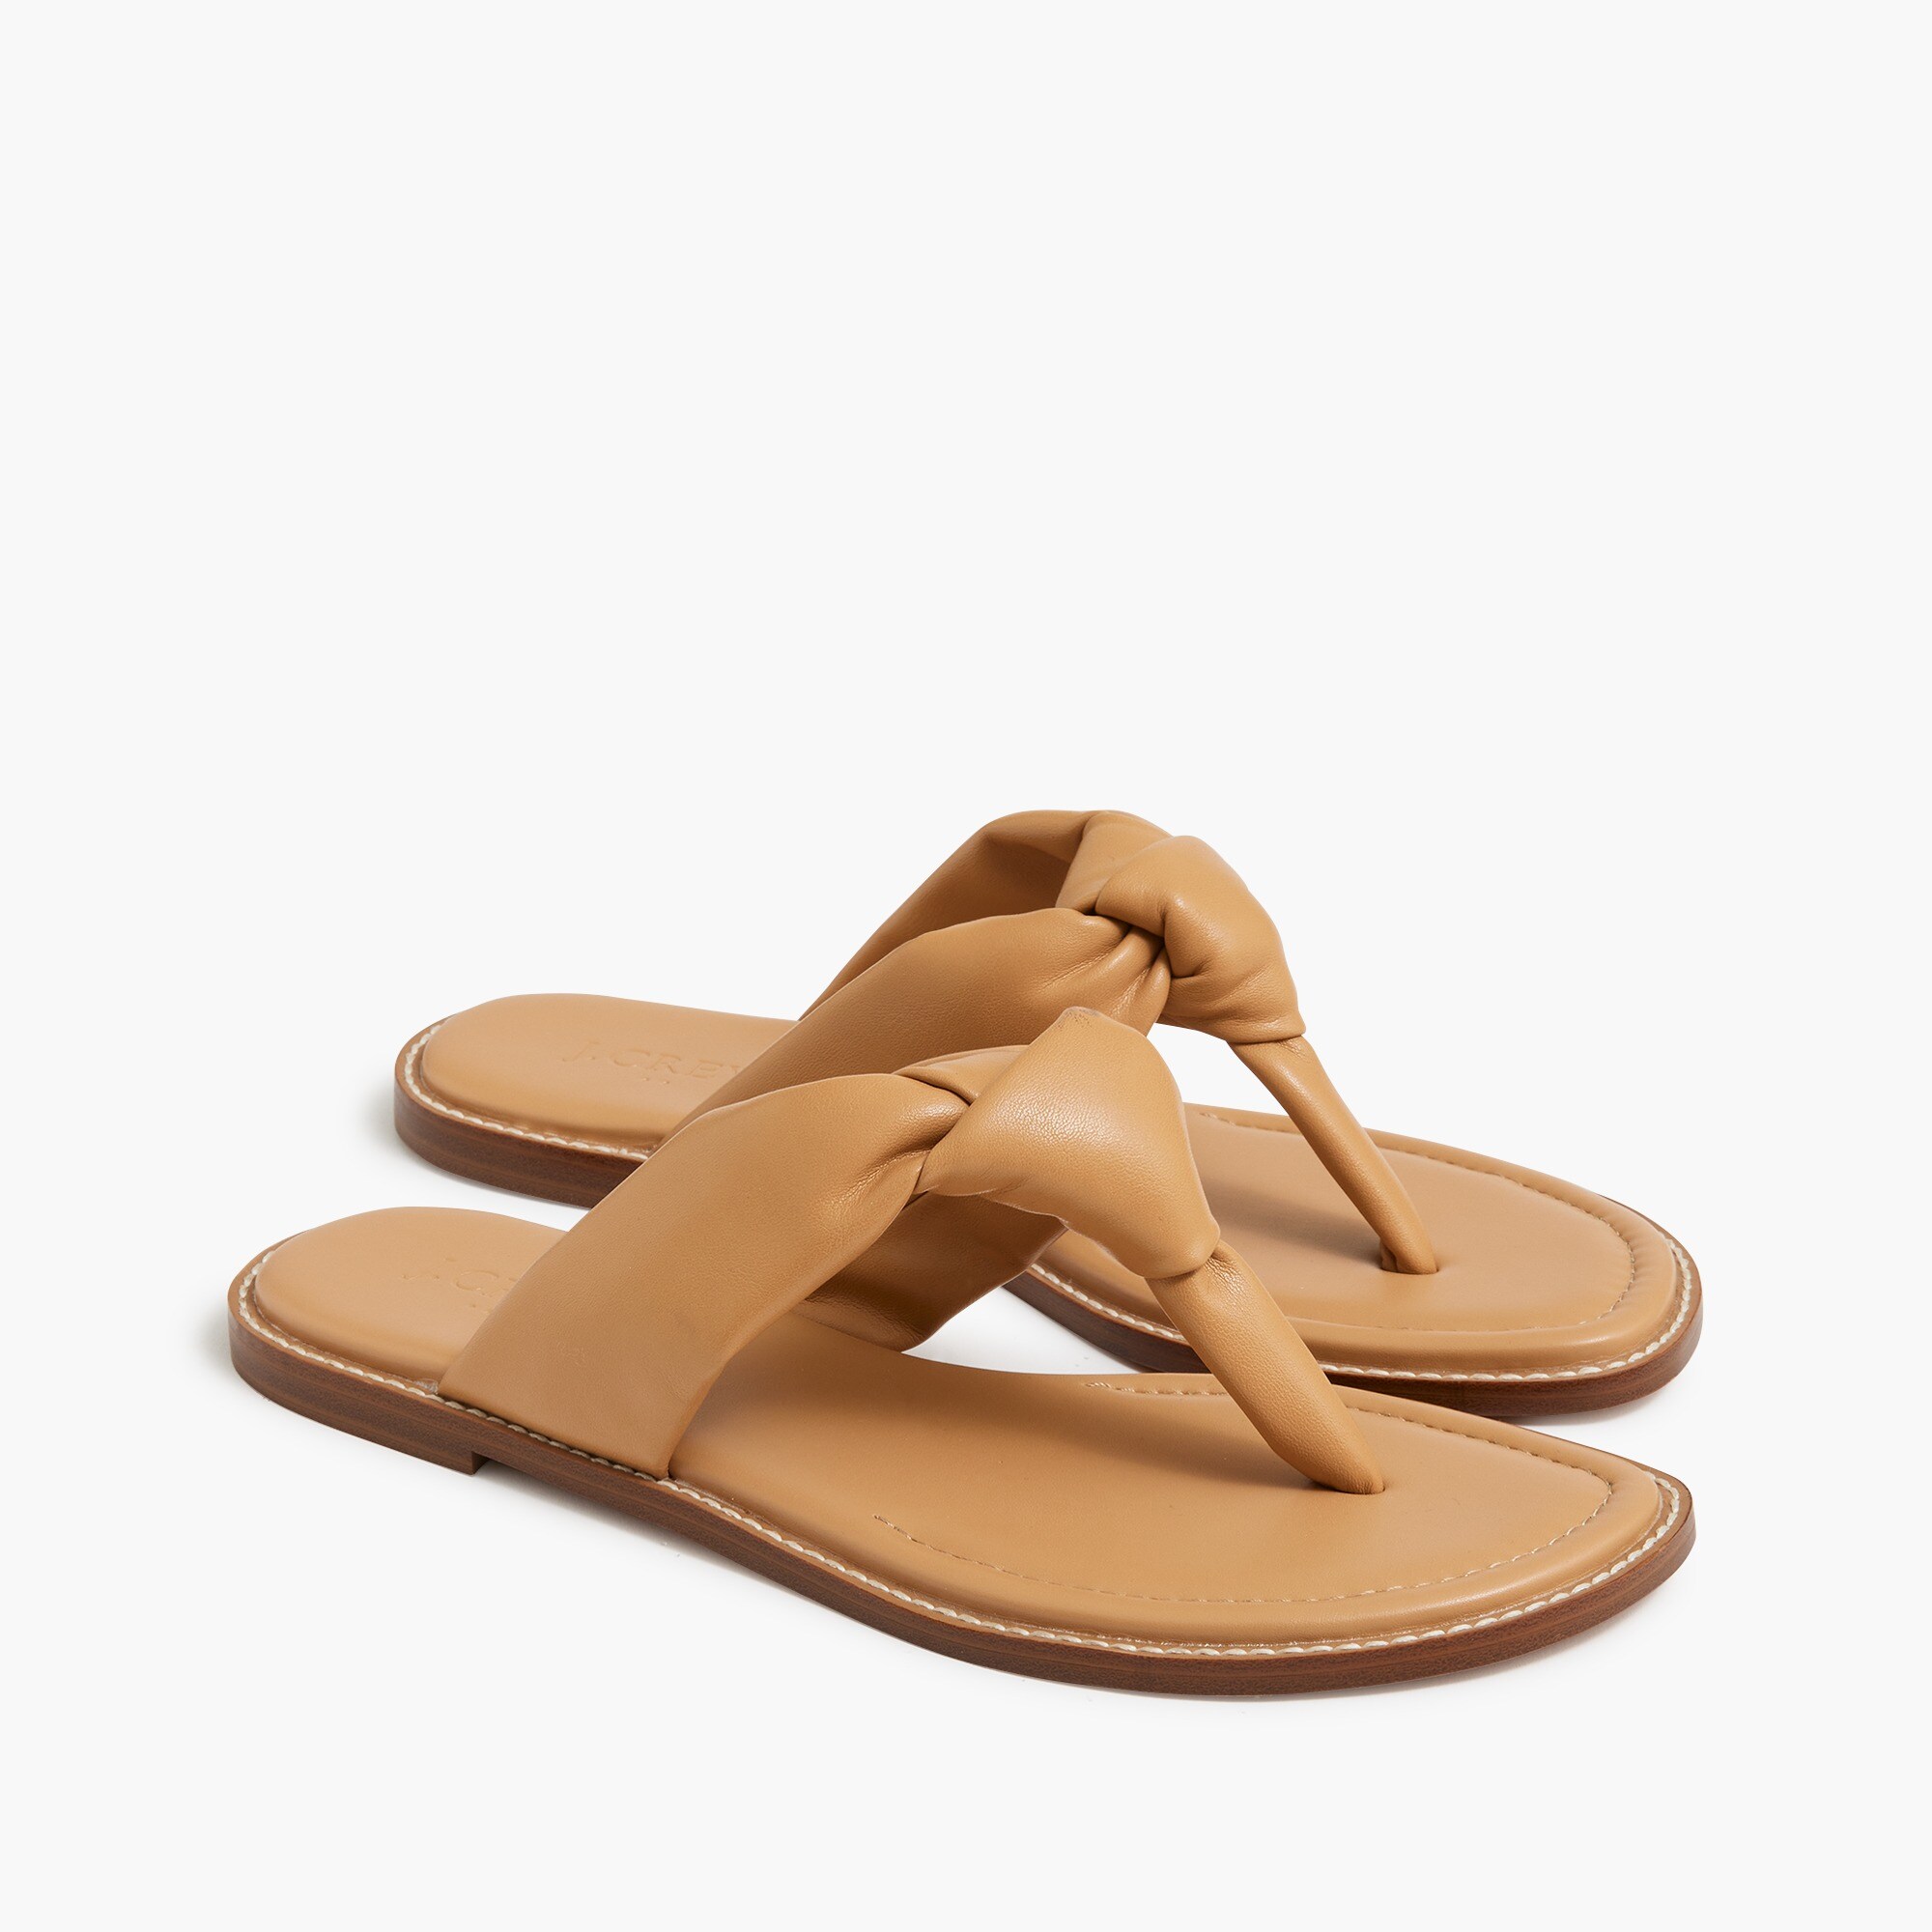 womens Knotted thong sandals